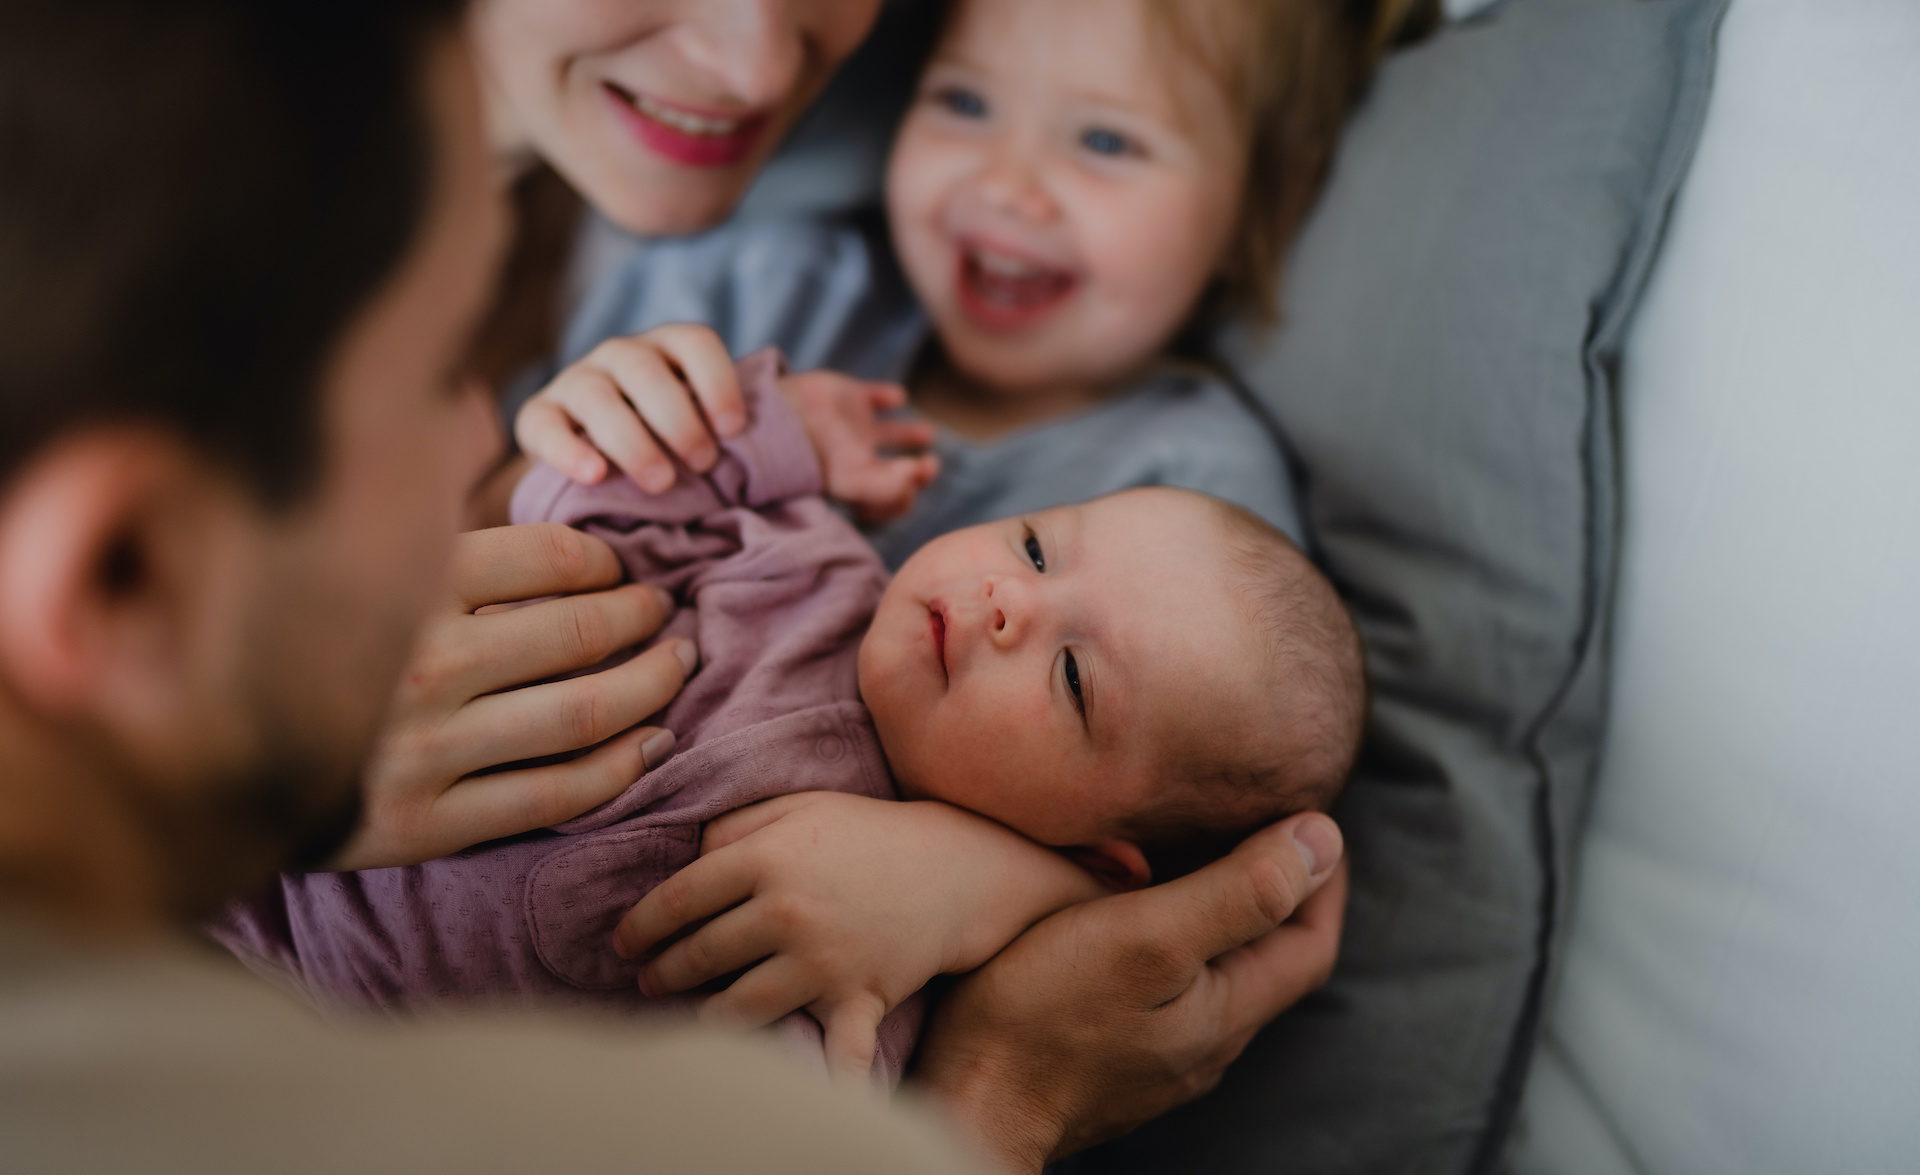 Donor Nexus represents Michigan egg donors and partners with Michigan fertility clinics to coordinate donor egg cycles. Learn more about our leading egg donation programs!